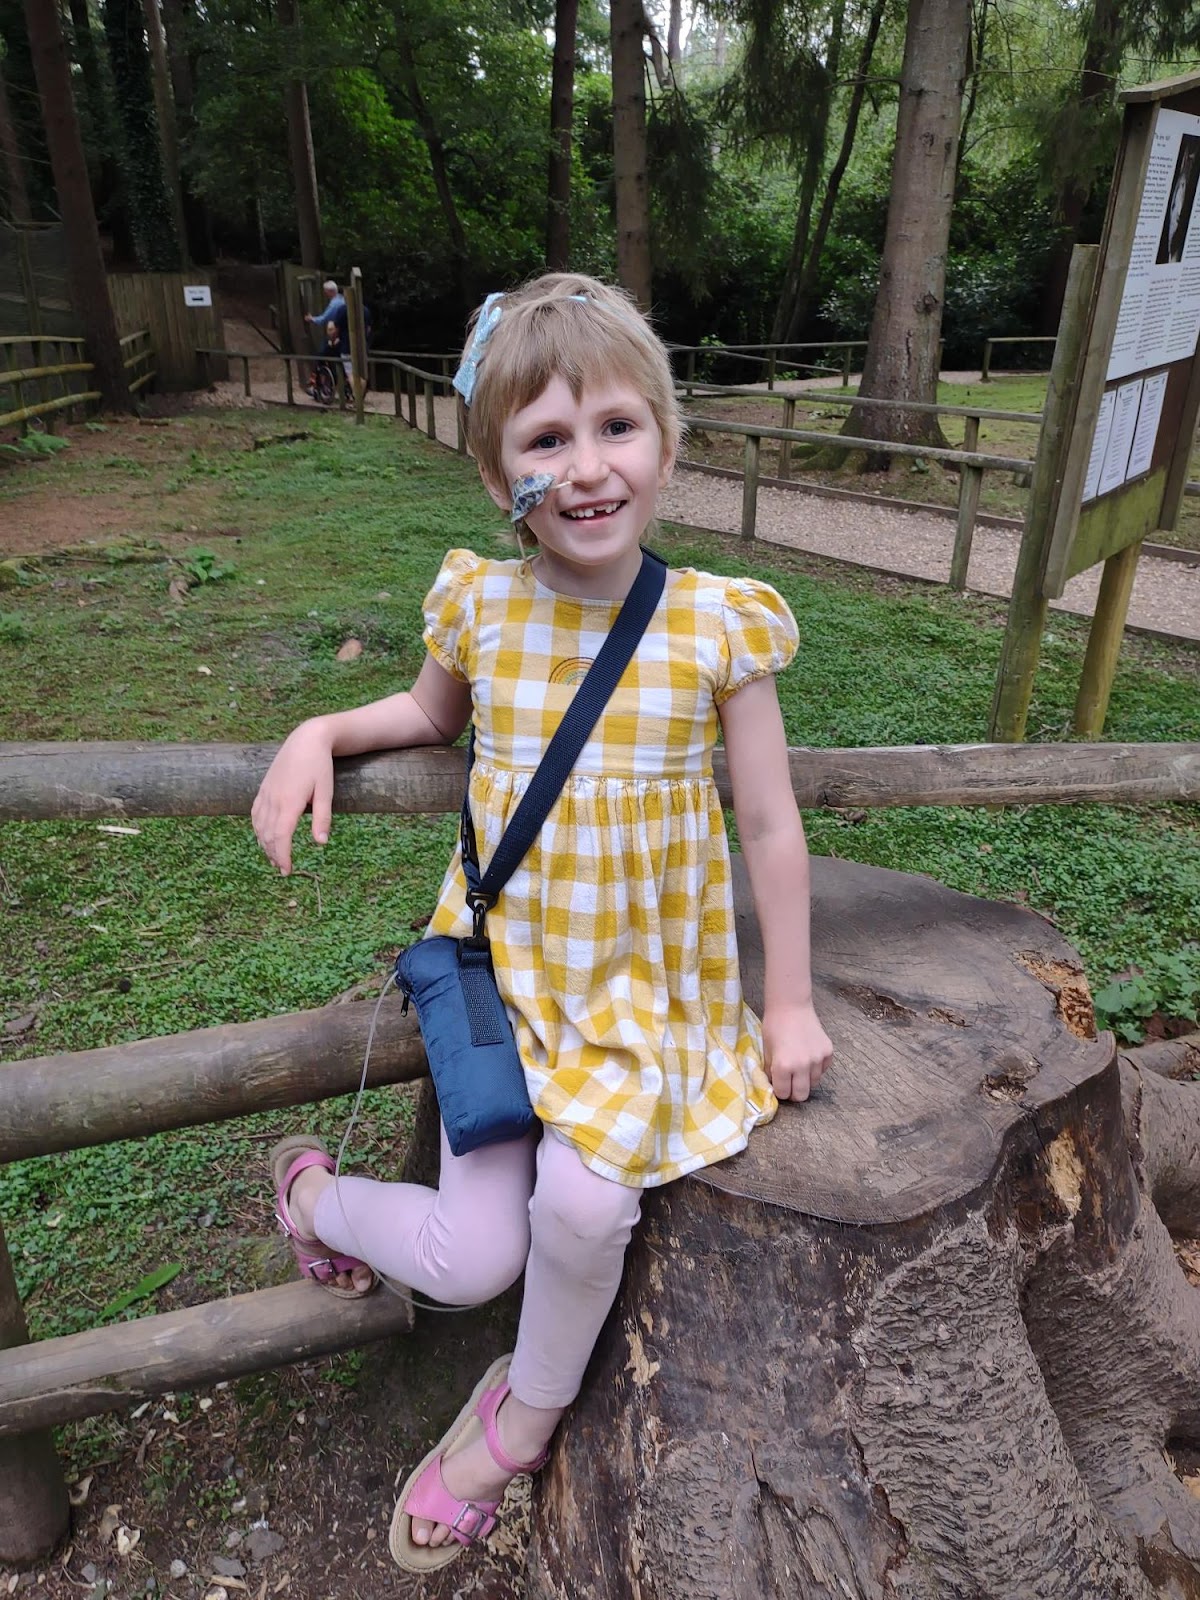 A young female neuroblastoma patient with a nasogastric tube smiling and standing by a tree stump